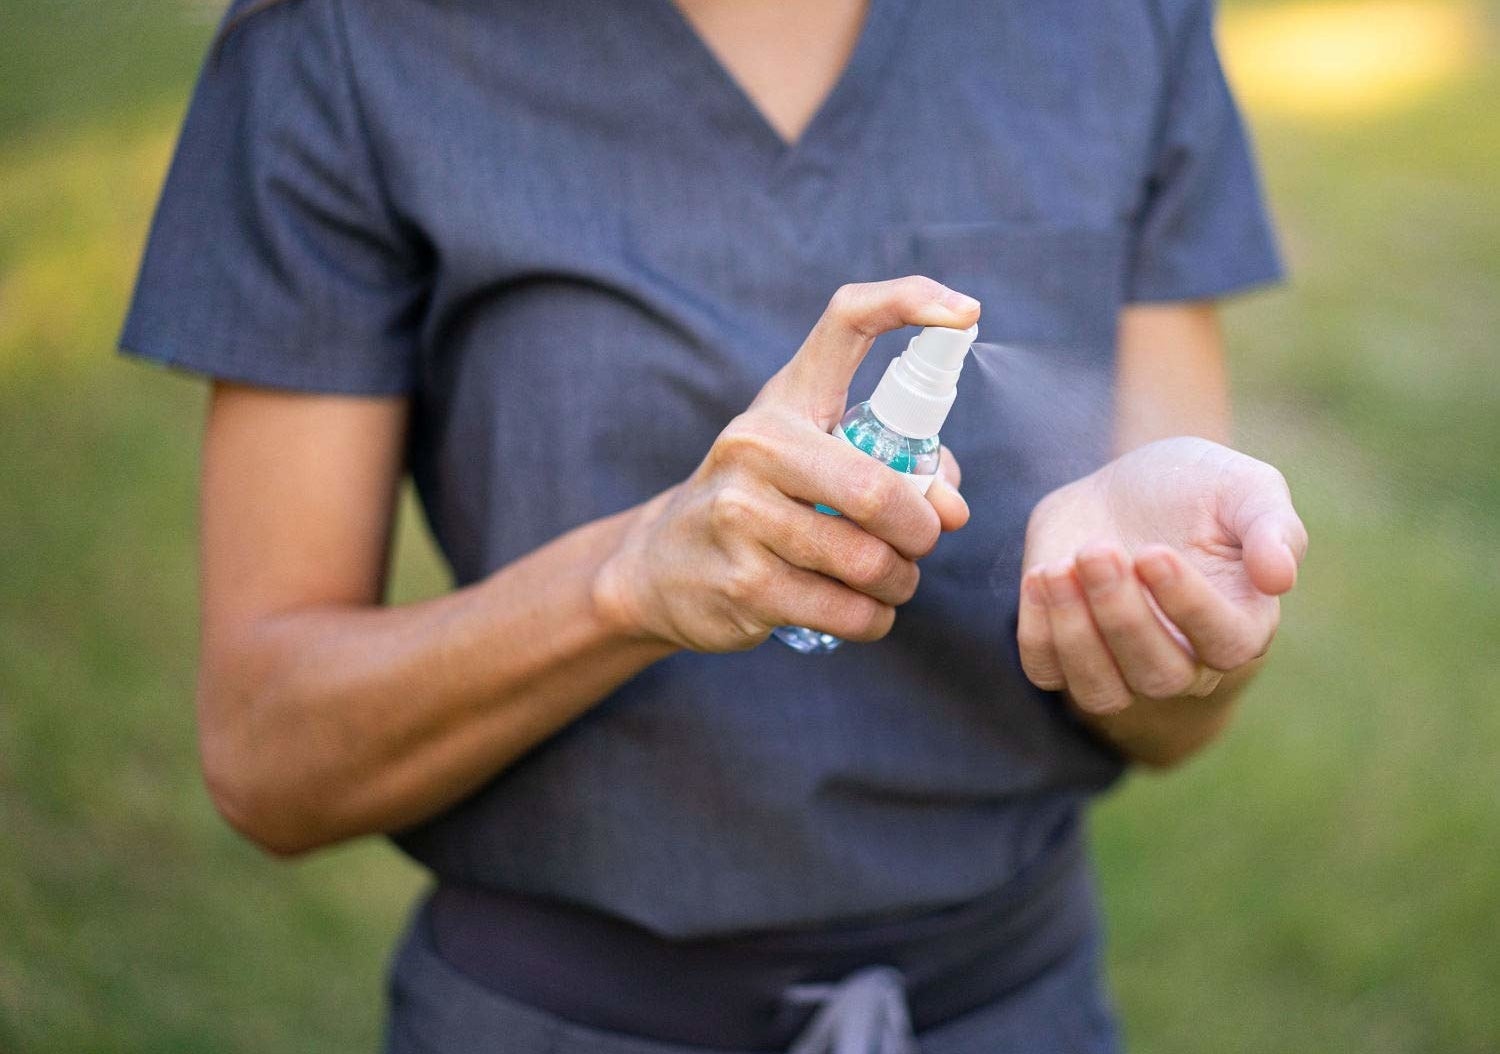 a model sprays the surgicept hand sanitizer on their hands